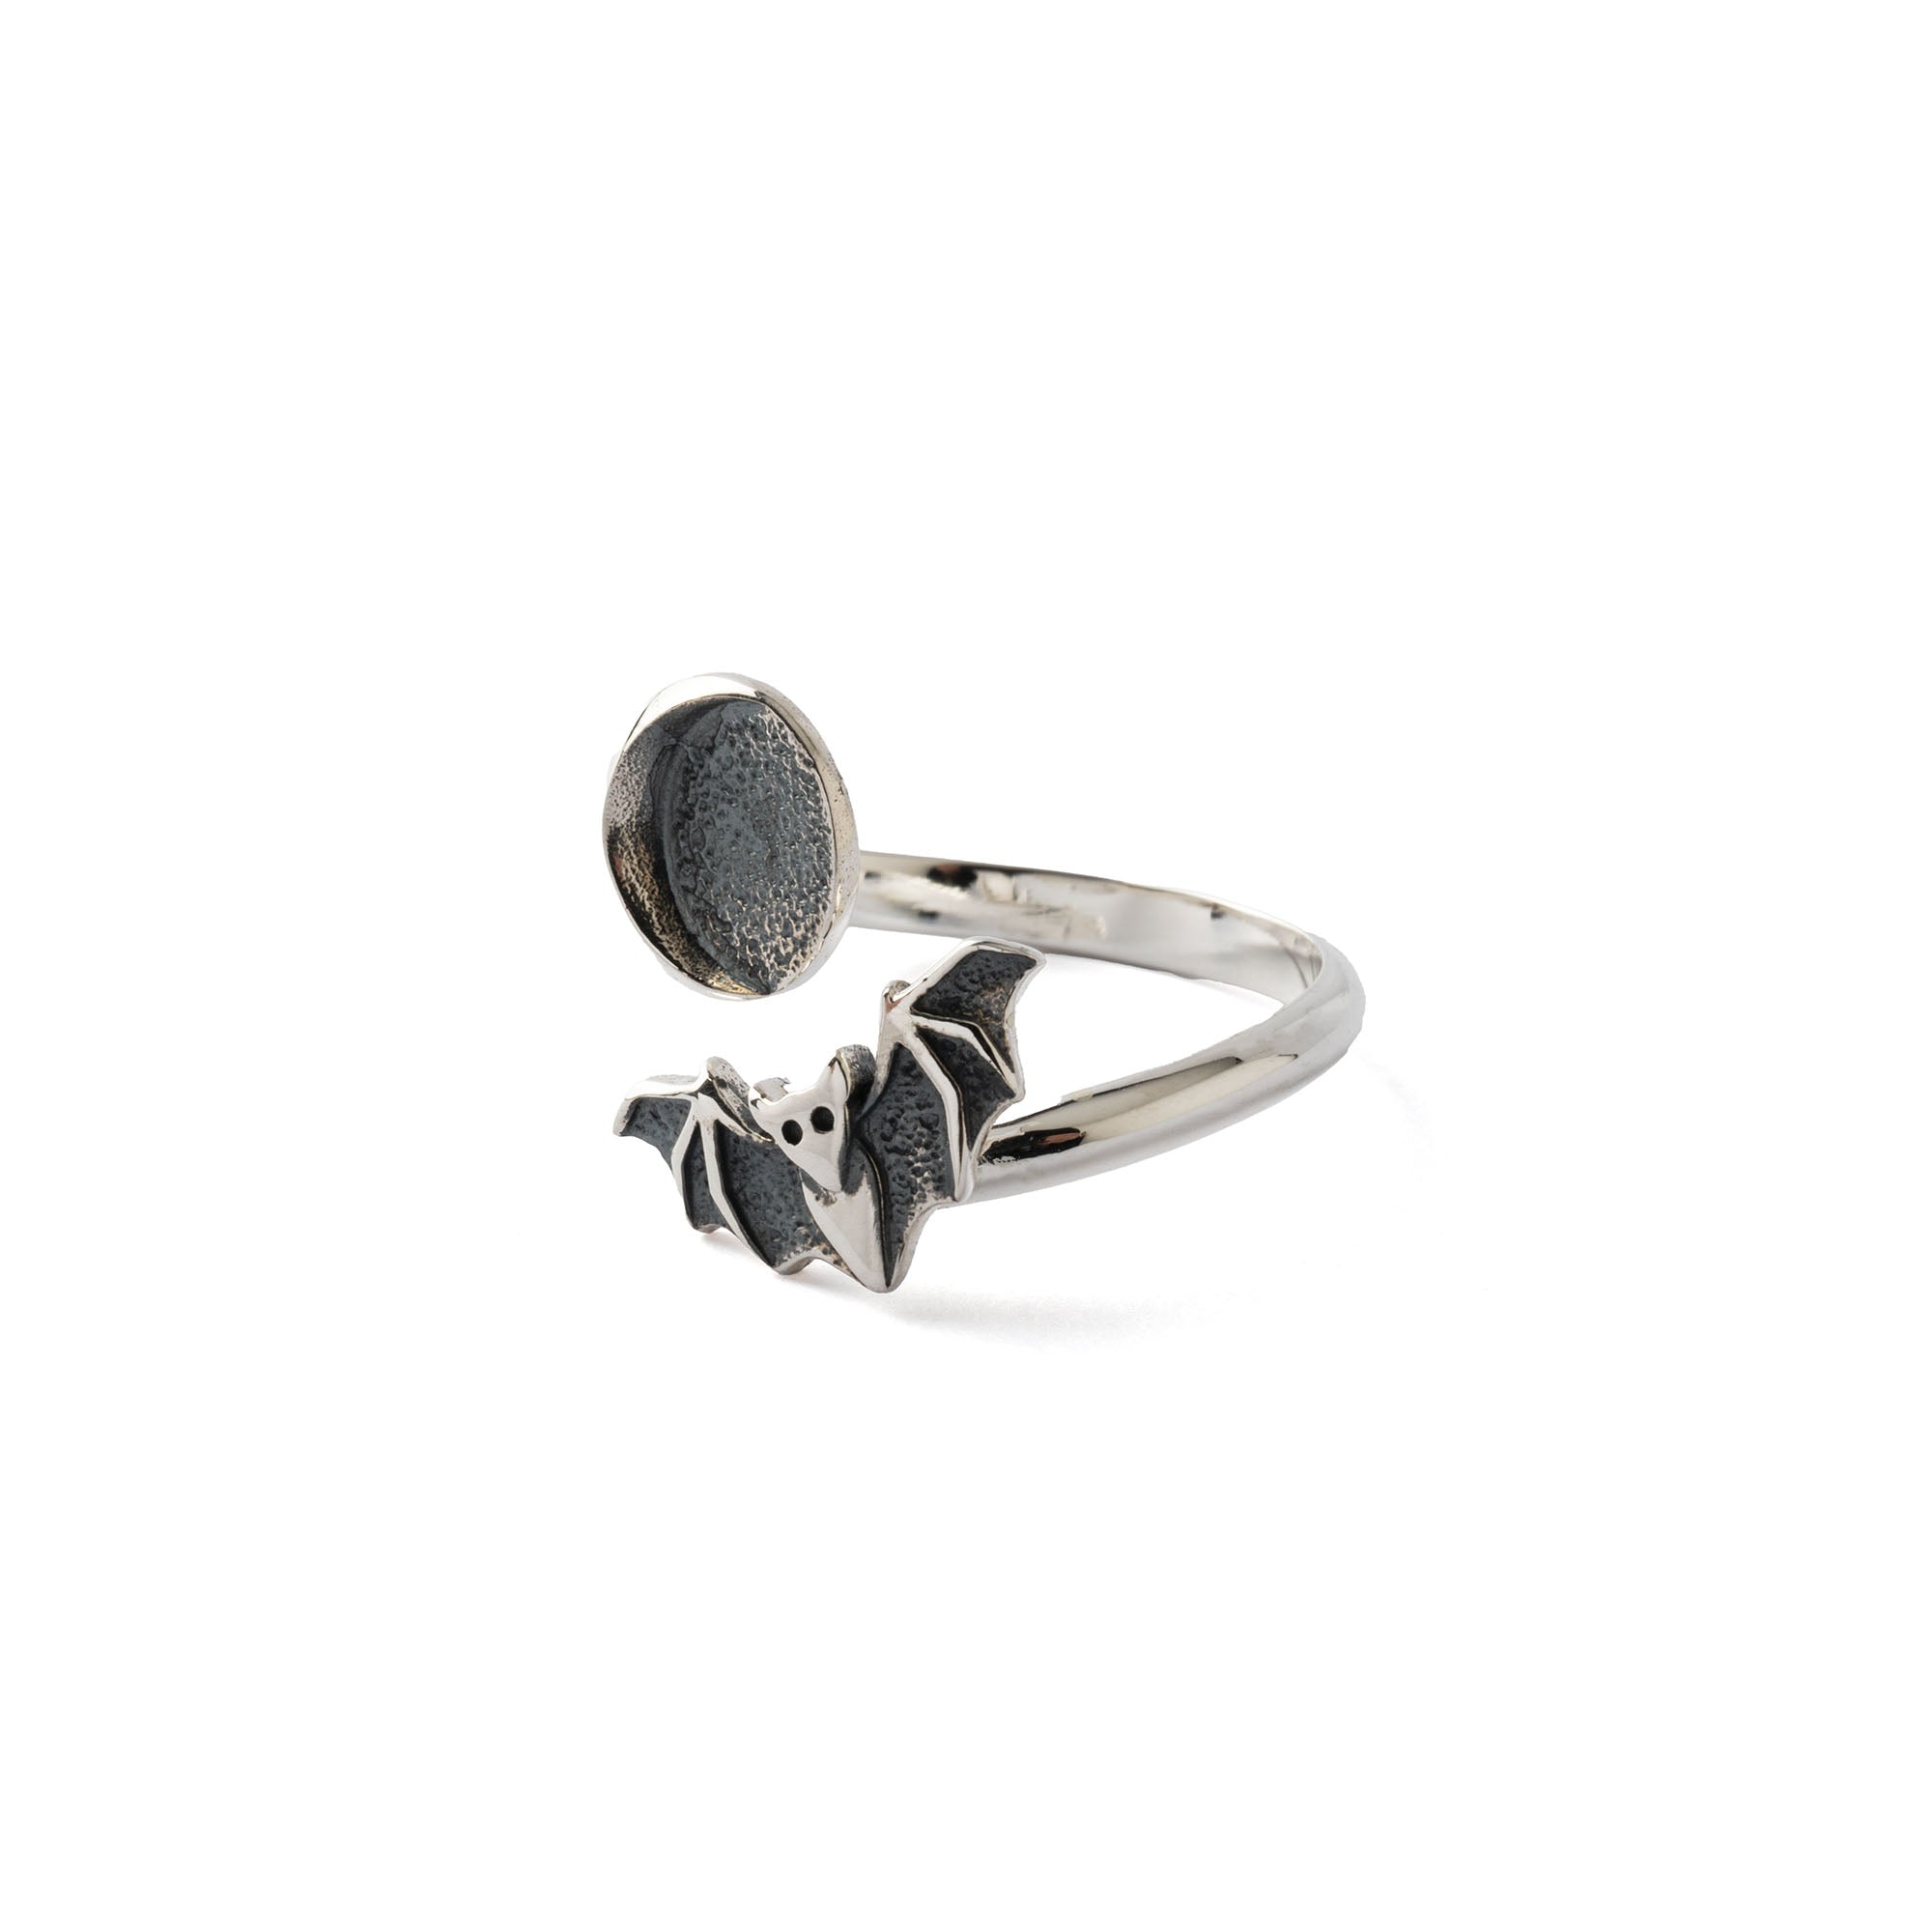 Lunar Bat Ring right side view